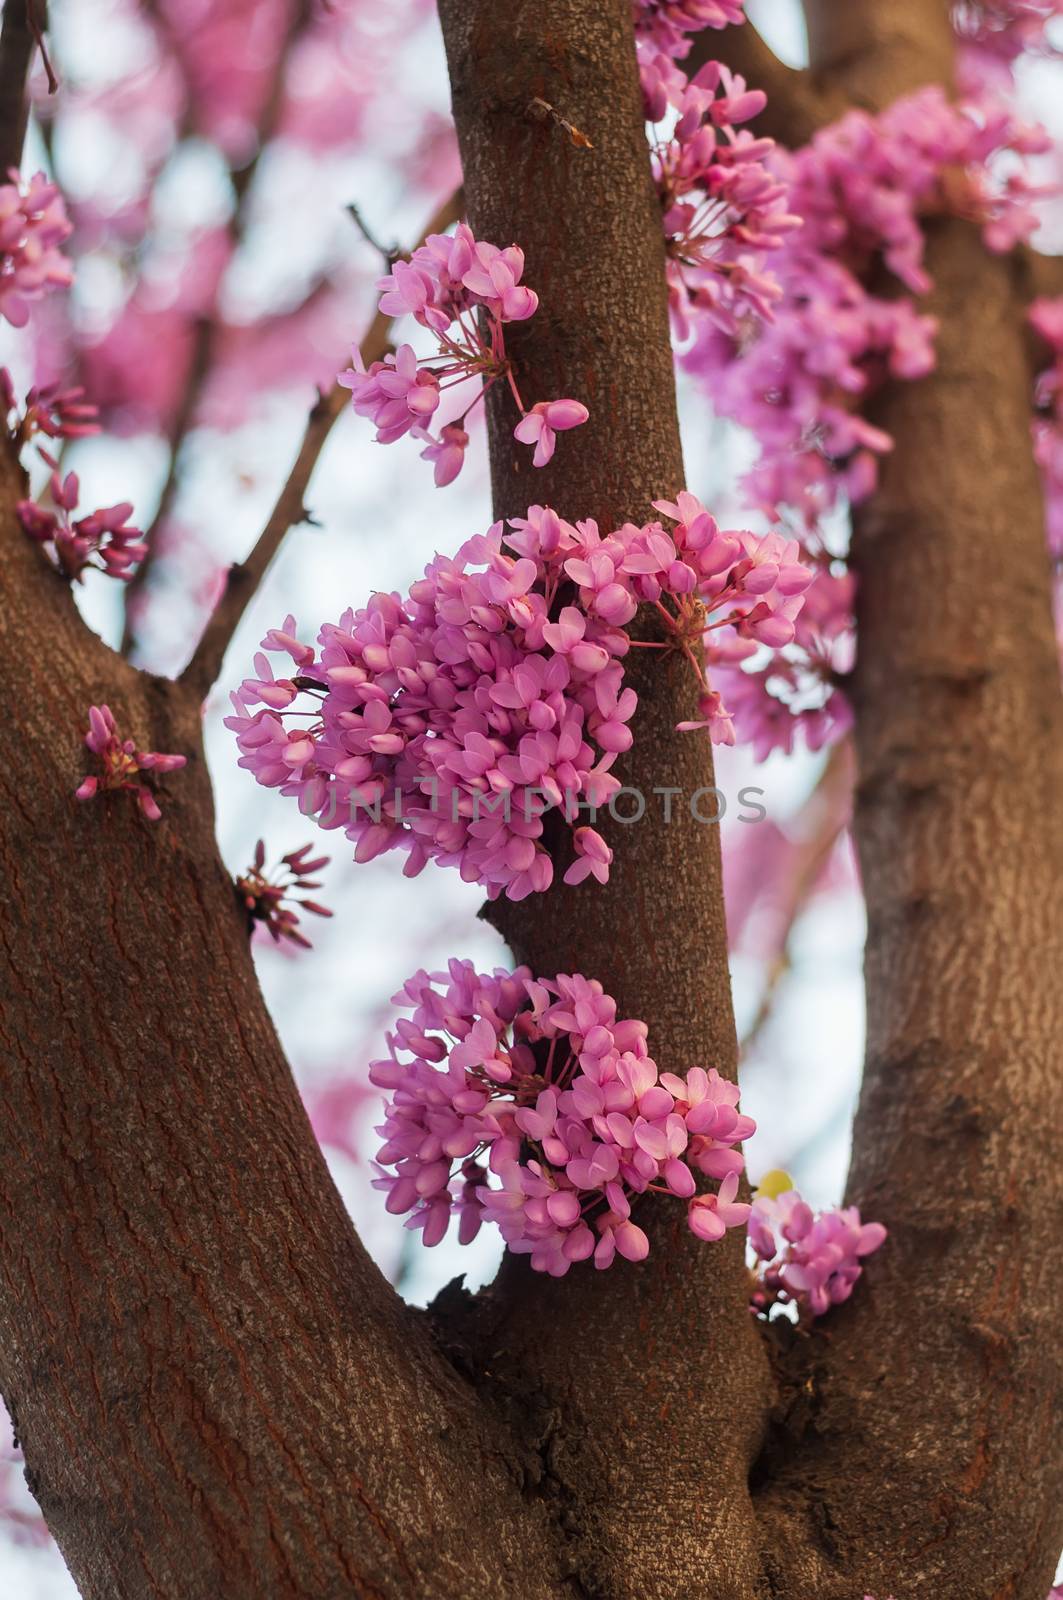 Pink flowers growing on tree by anytka